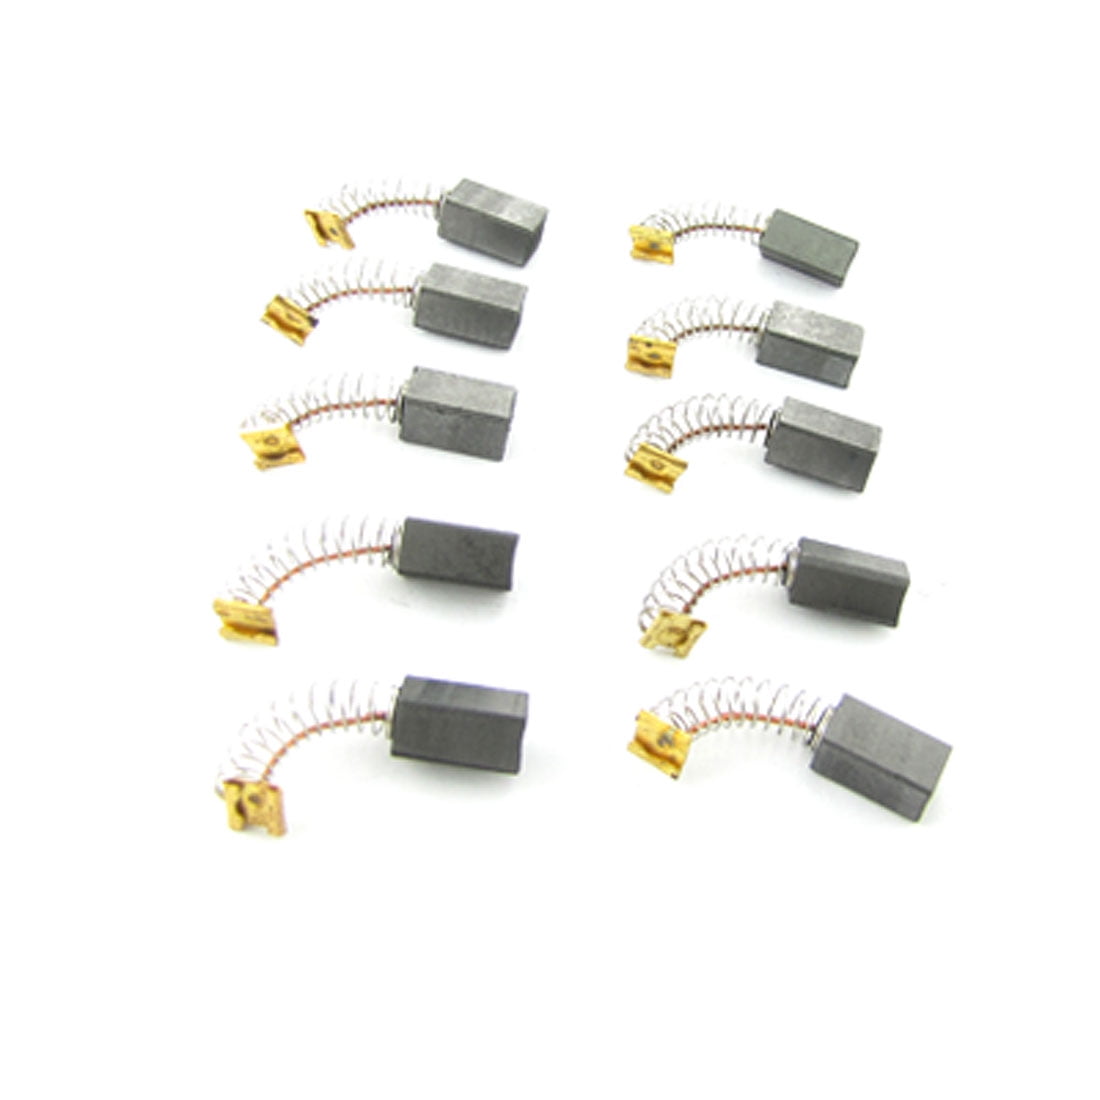 10pcs 4 x 4 x 14mm Universal Motor Carbon Brushes For Electric Tools 